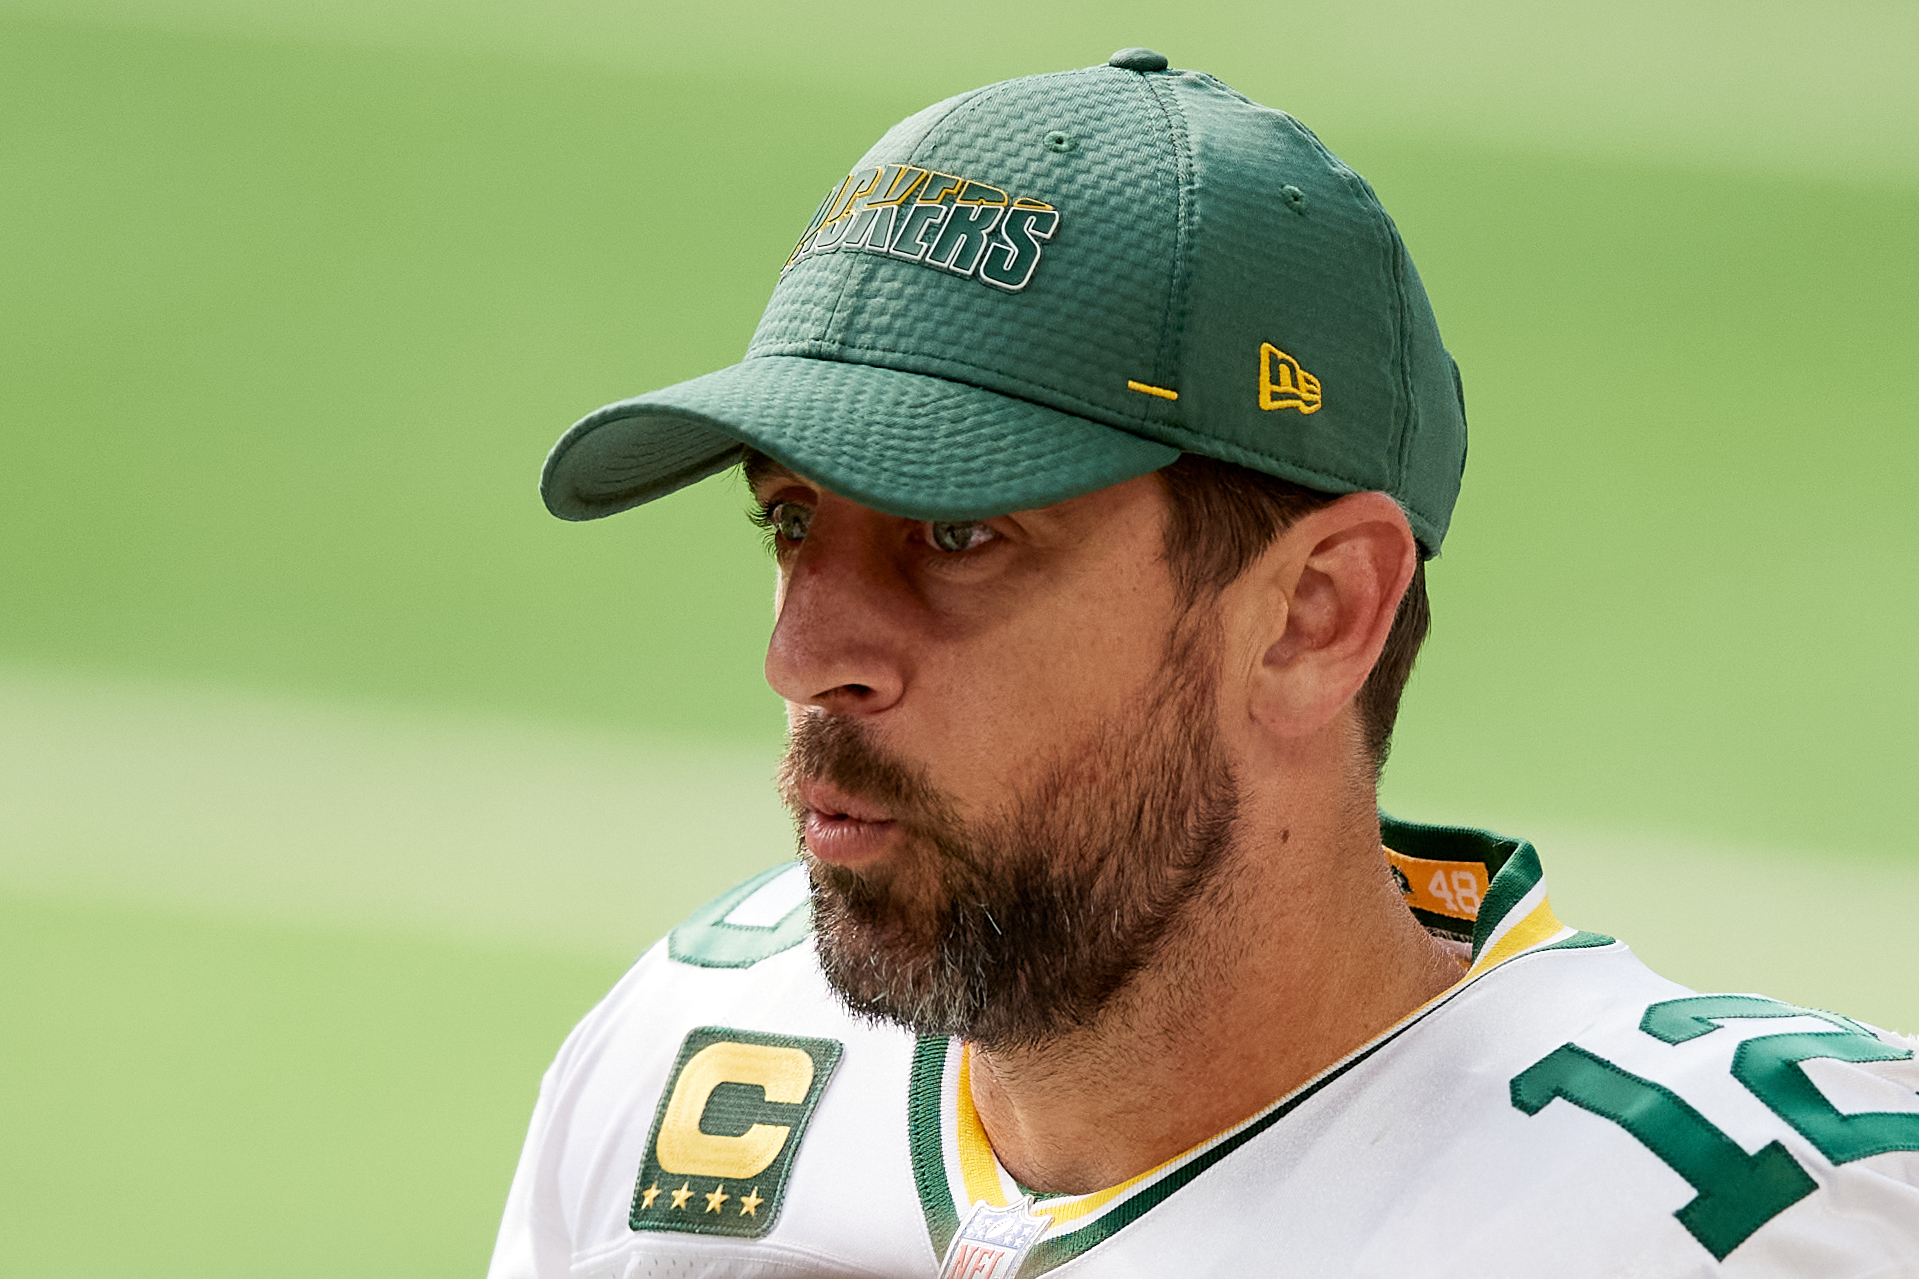 Aaron Rodgers looking on from the sideline during a Packers game